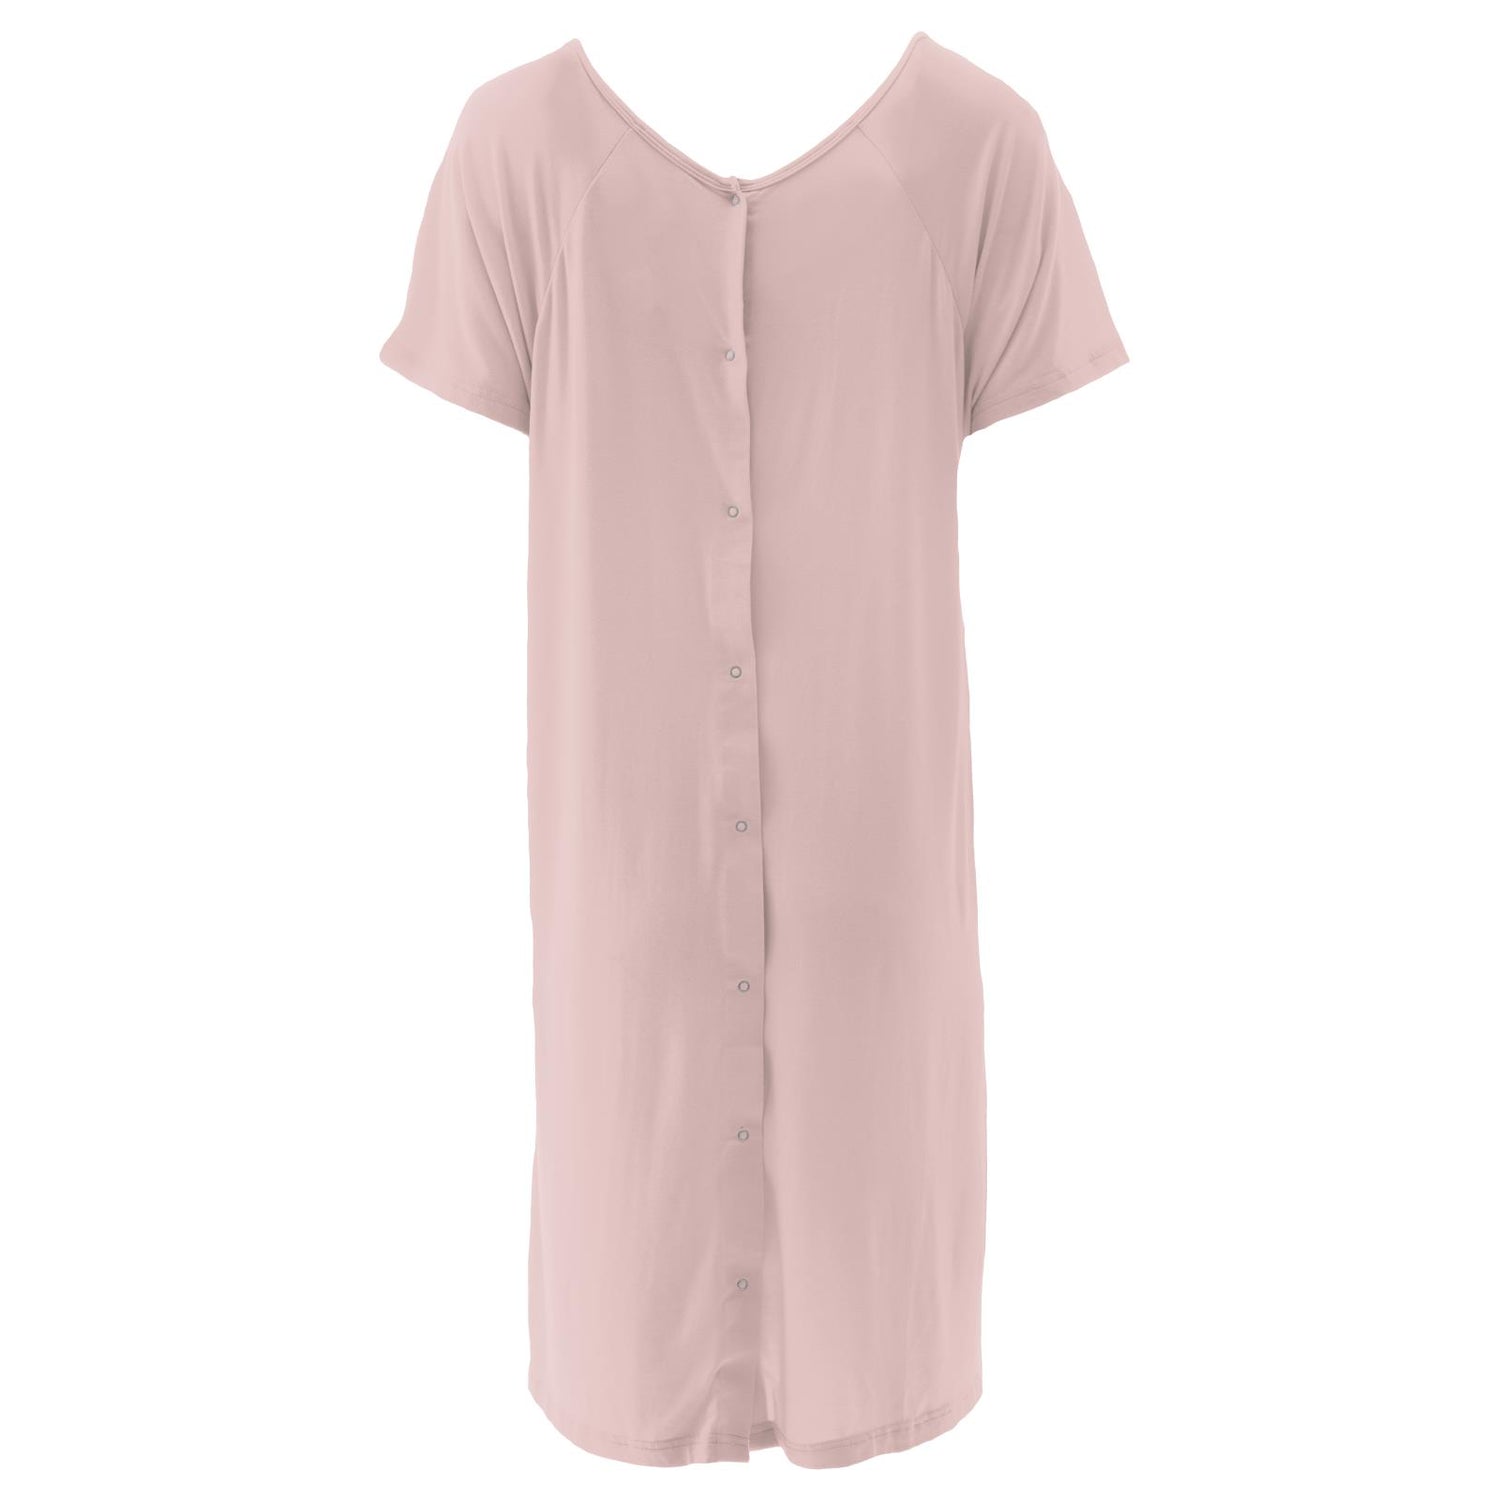 Women's Hospital Gown in Baby Rose